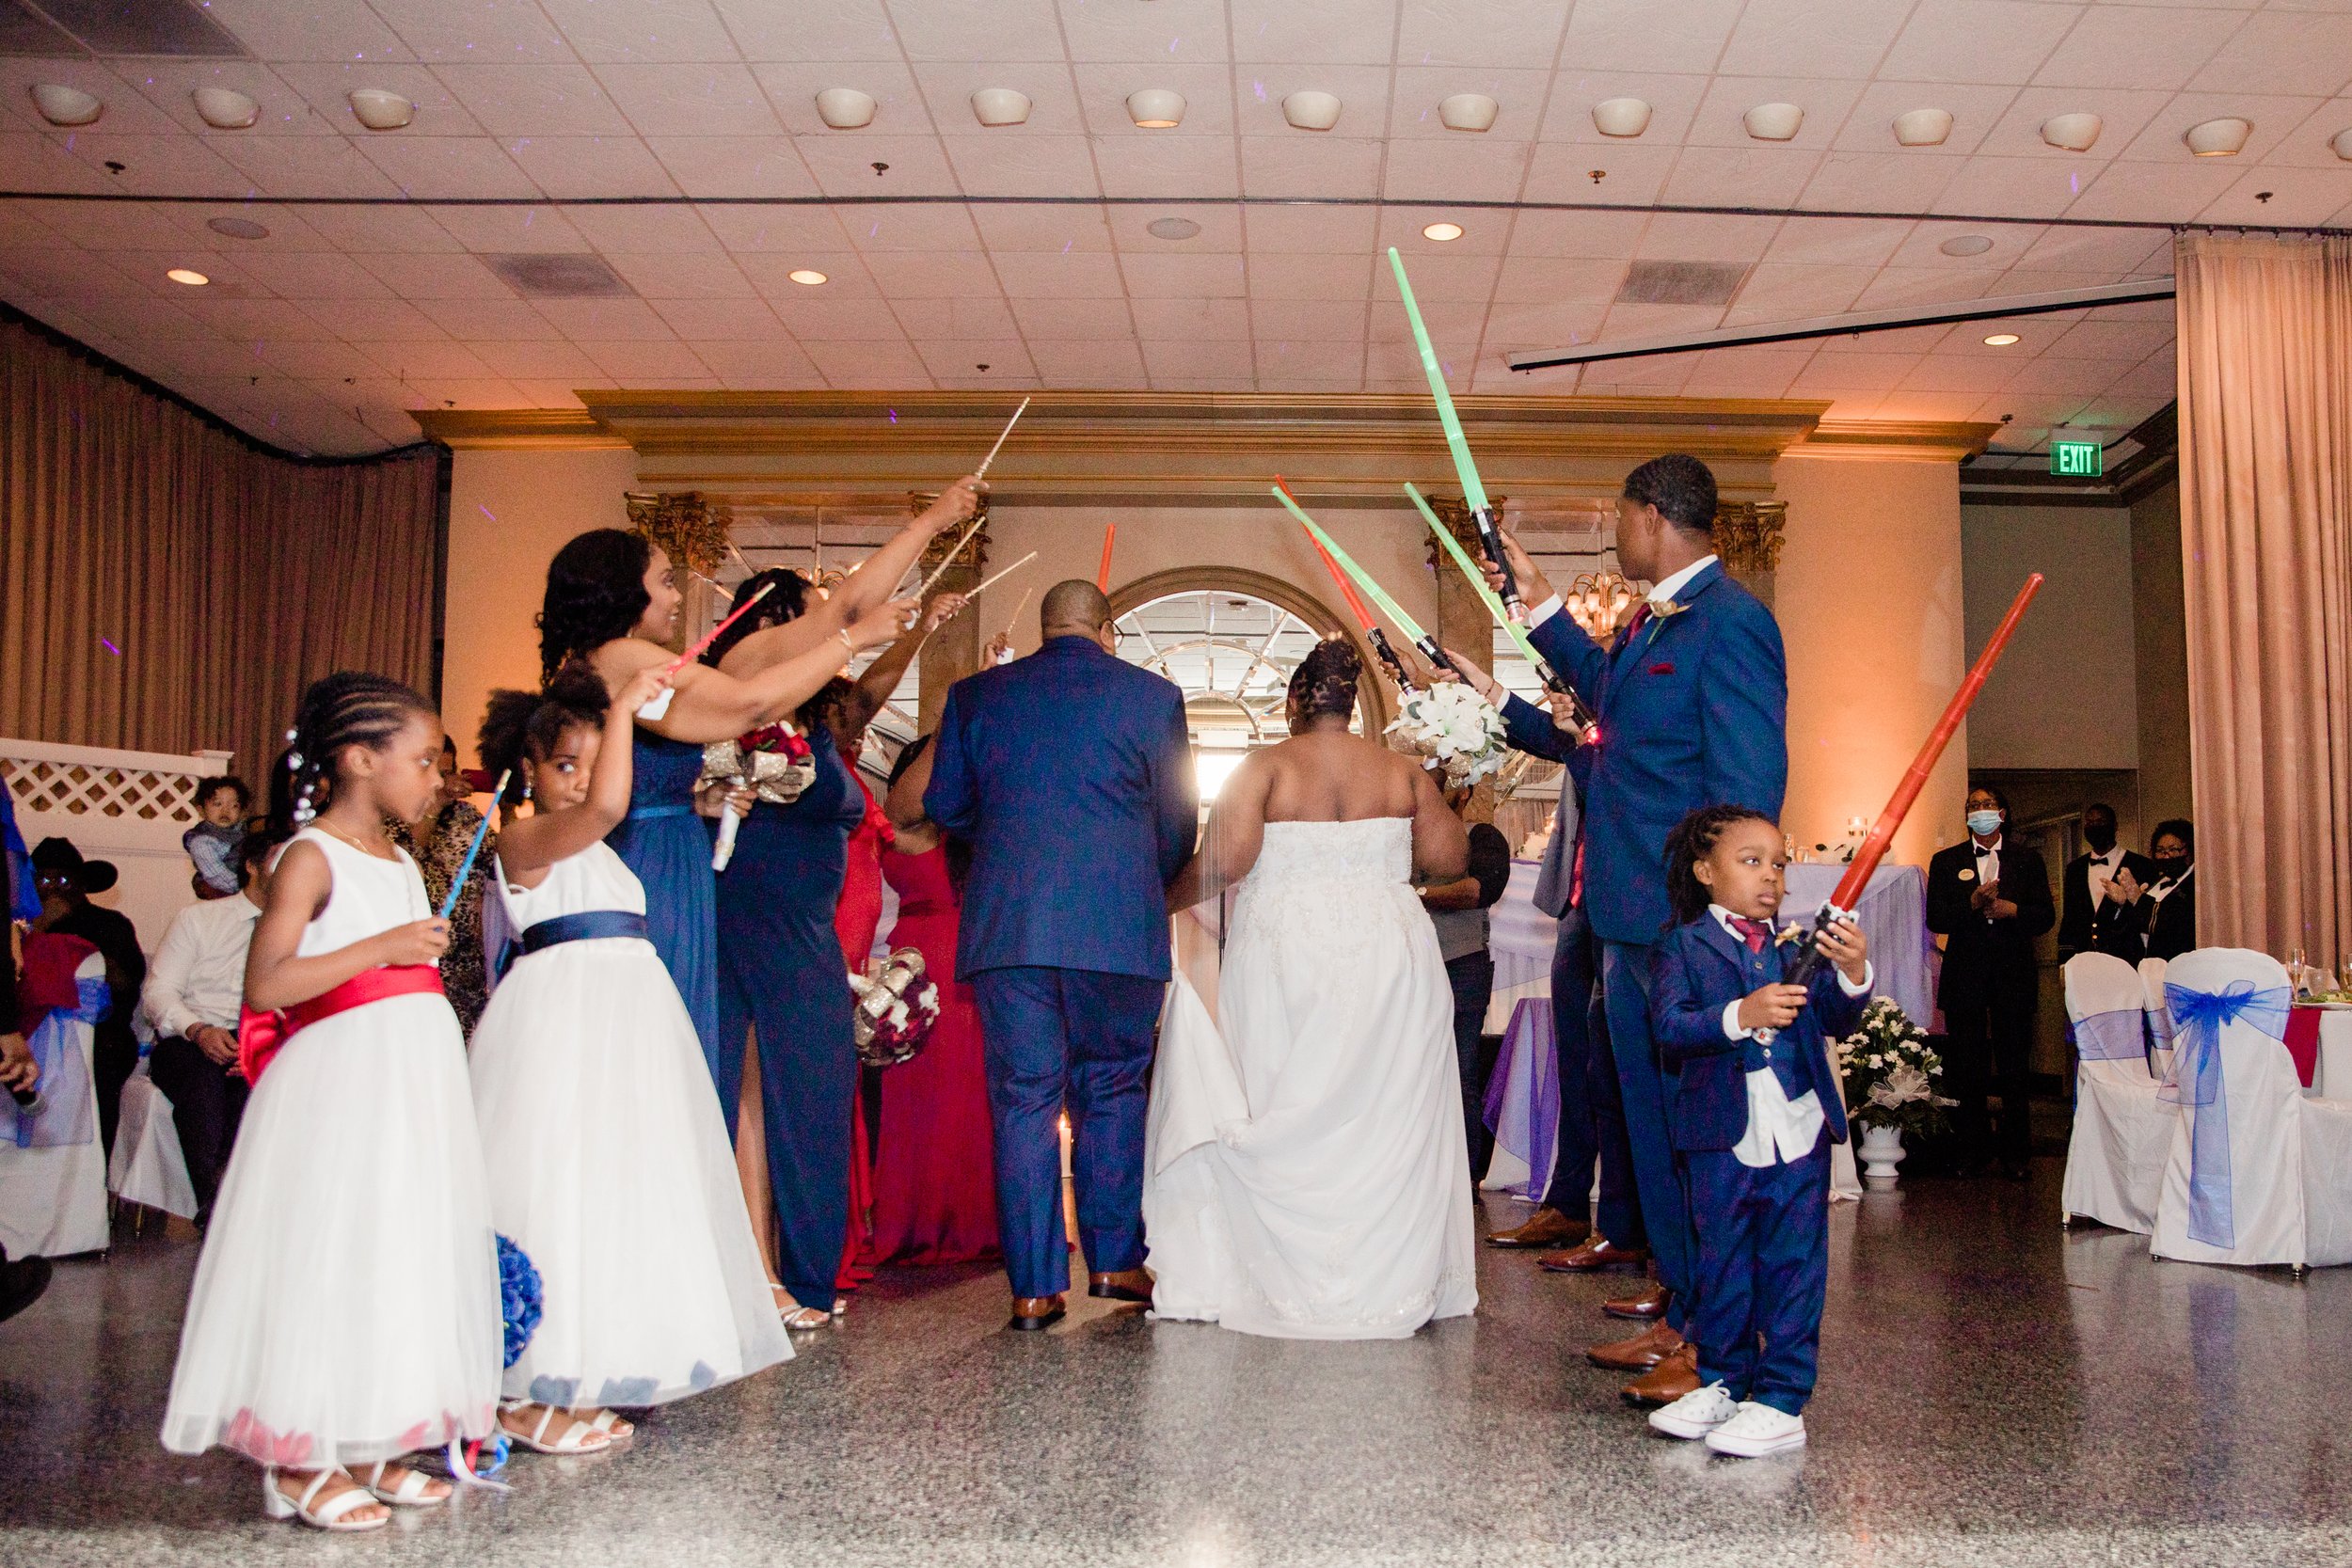 Harry Potter and Star Wars Themed Wedding at Martins West in Baltimore Maryland Shot by Megapixels Media Photography-35.jpg